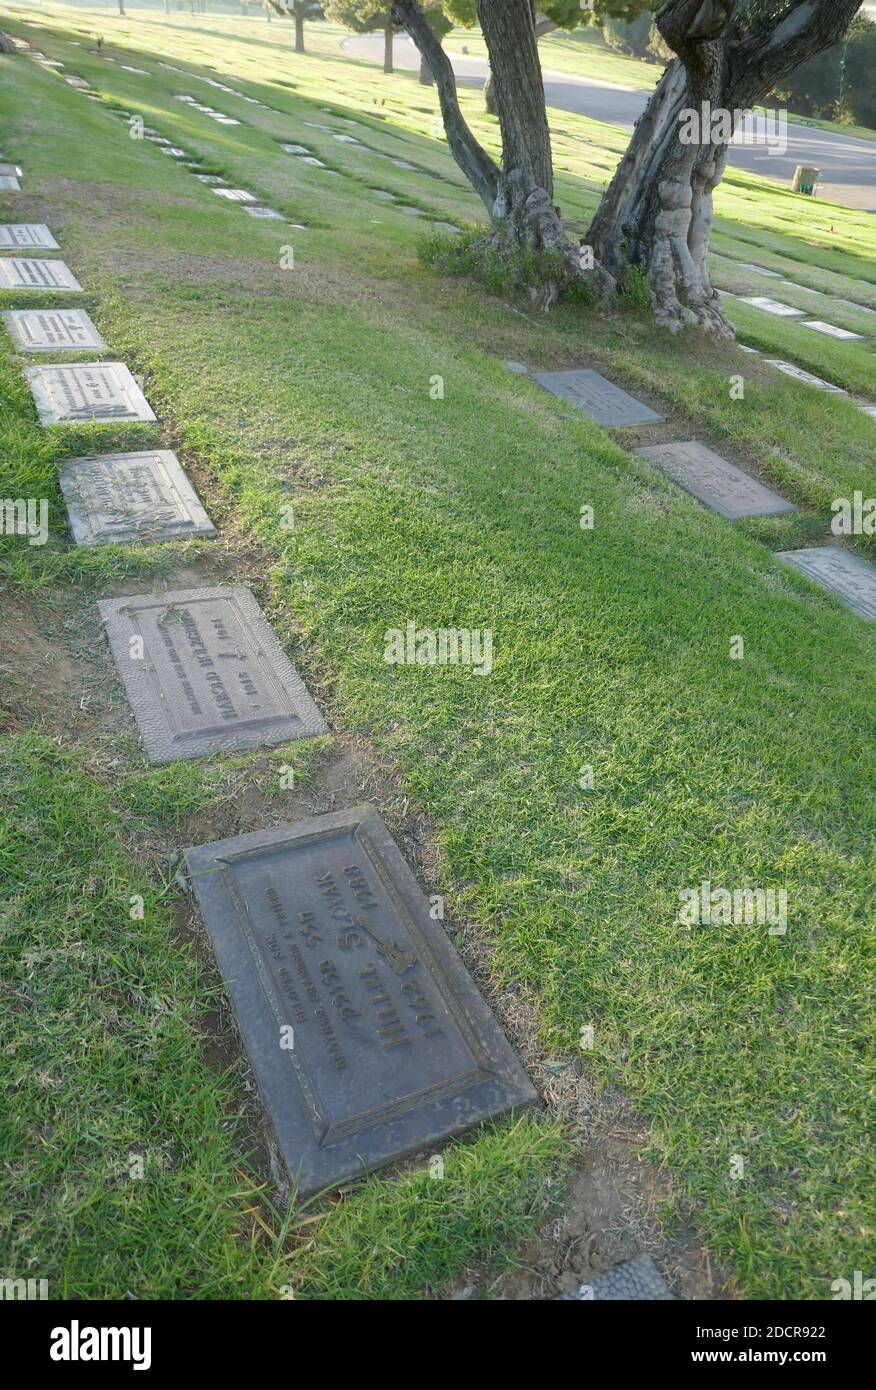 Los Angeles, California, USA 17th November 2020 A general view of atmosphere of musician Hillel Slovak's Grave at Mount Sinai Cemetery Hollywood Hills on November 17, 2020 in Los Angeles, California, USA. Photo by Barry King/Alamy Stock Photo Stock Photo